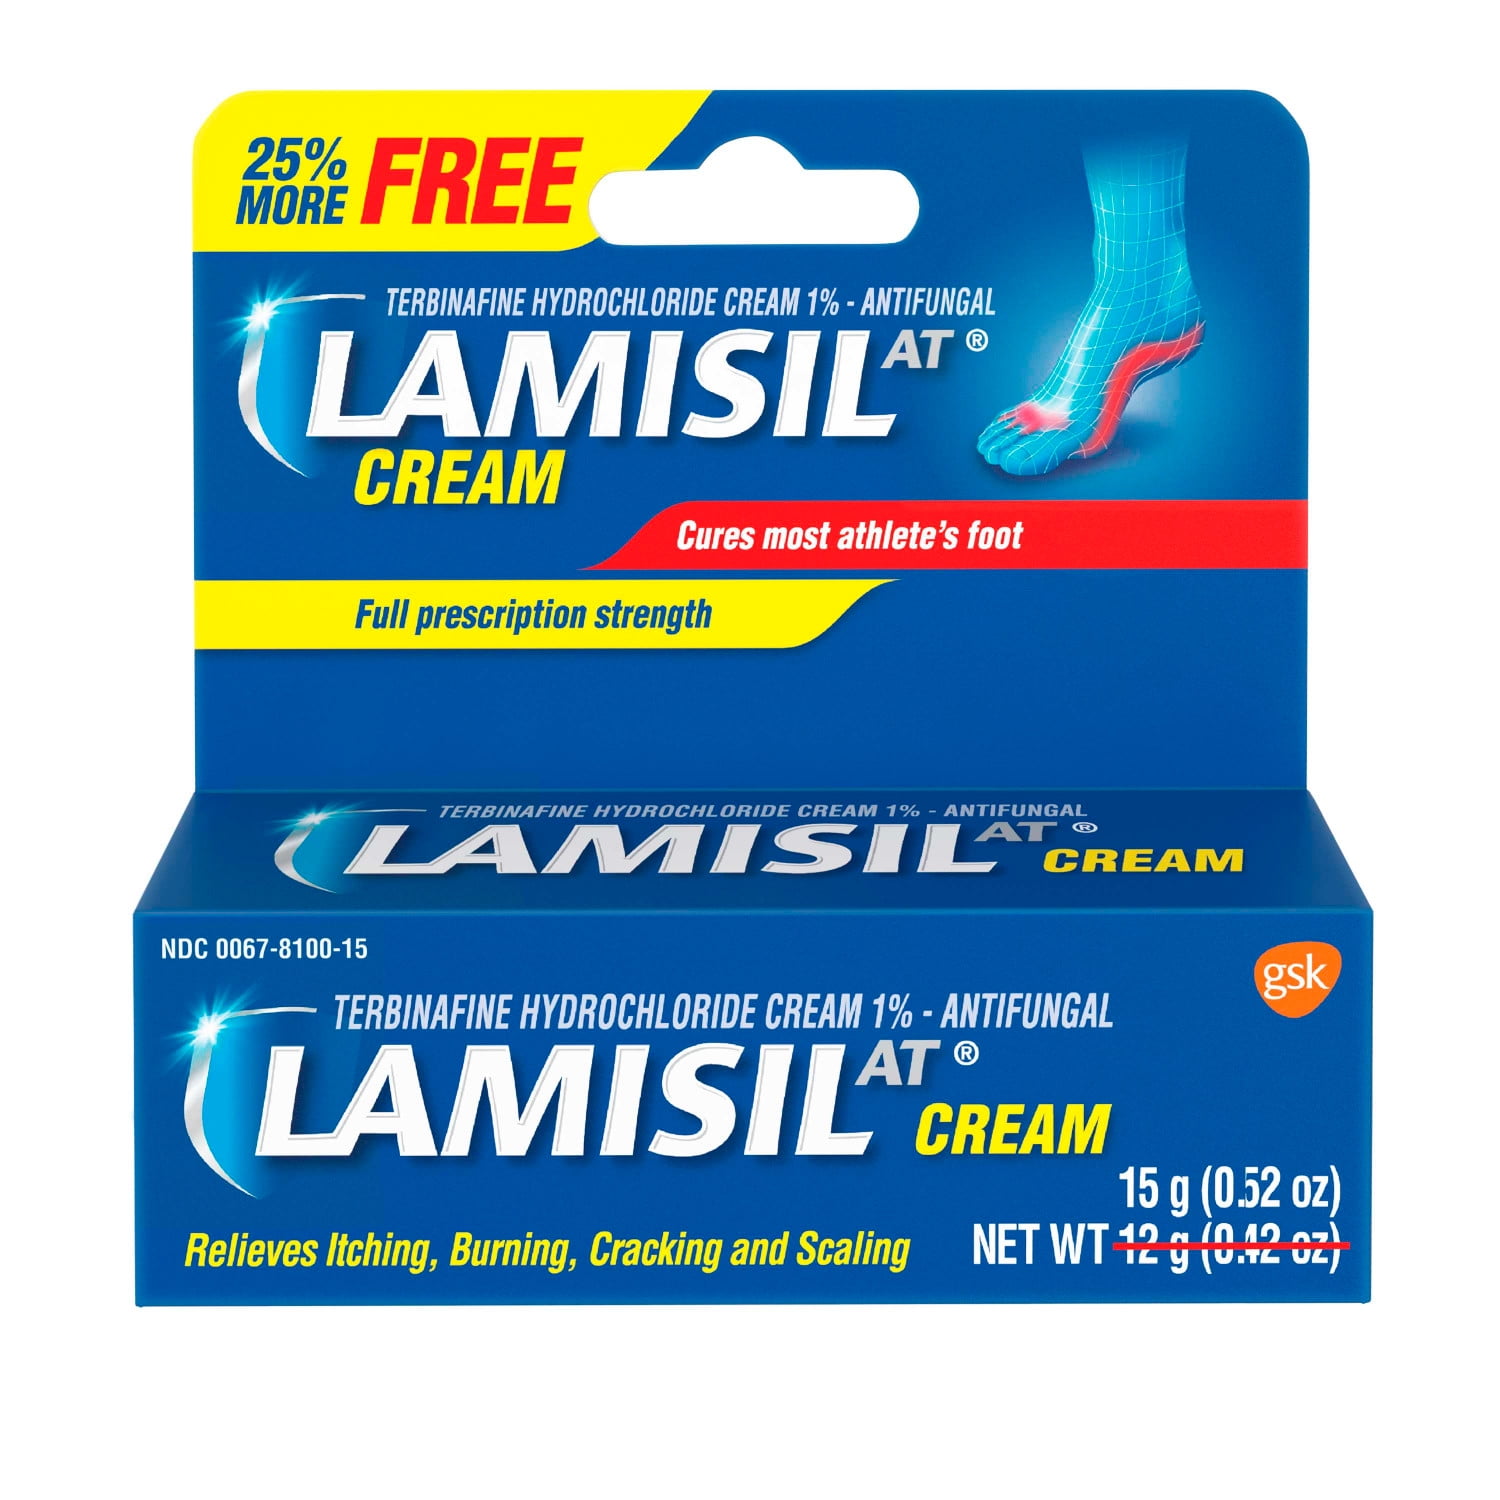 is lamisil cream safe for babies